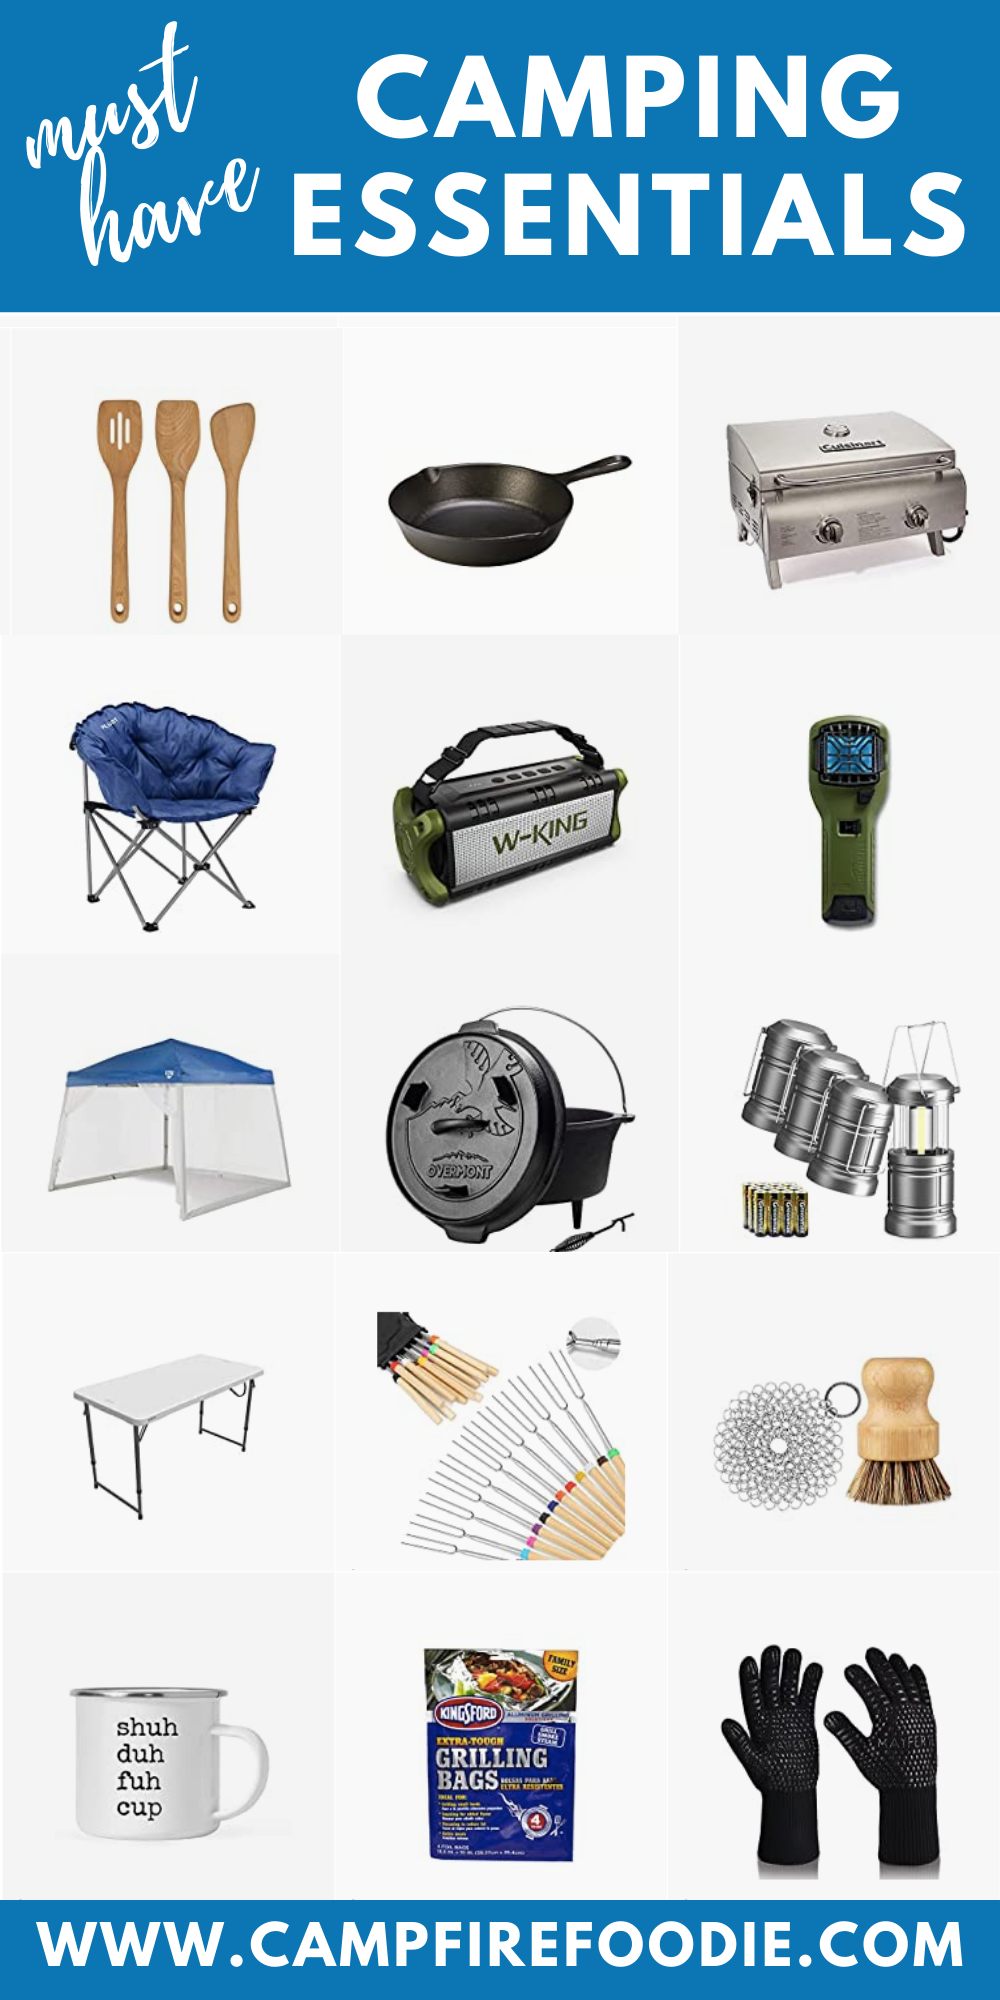 https://campfirefoodie.com/wp-content/uploads/2021/02/Campfire-Foodie-Camping-Essentials.png